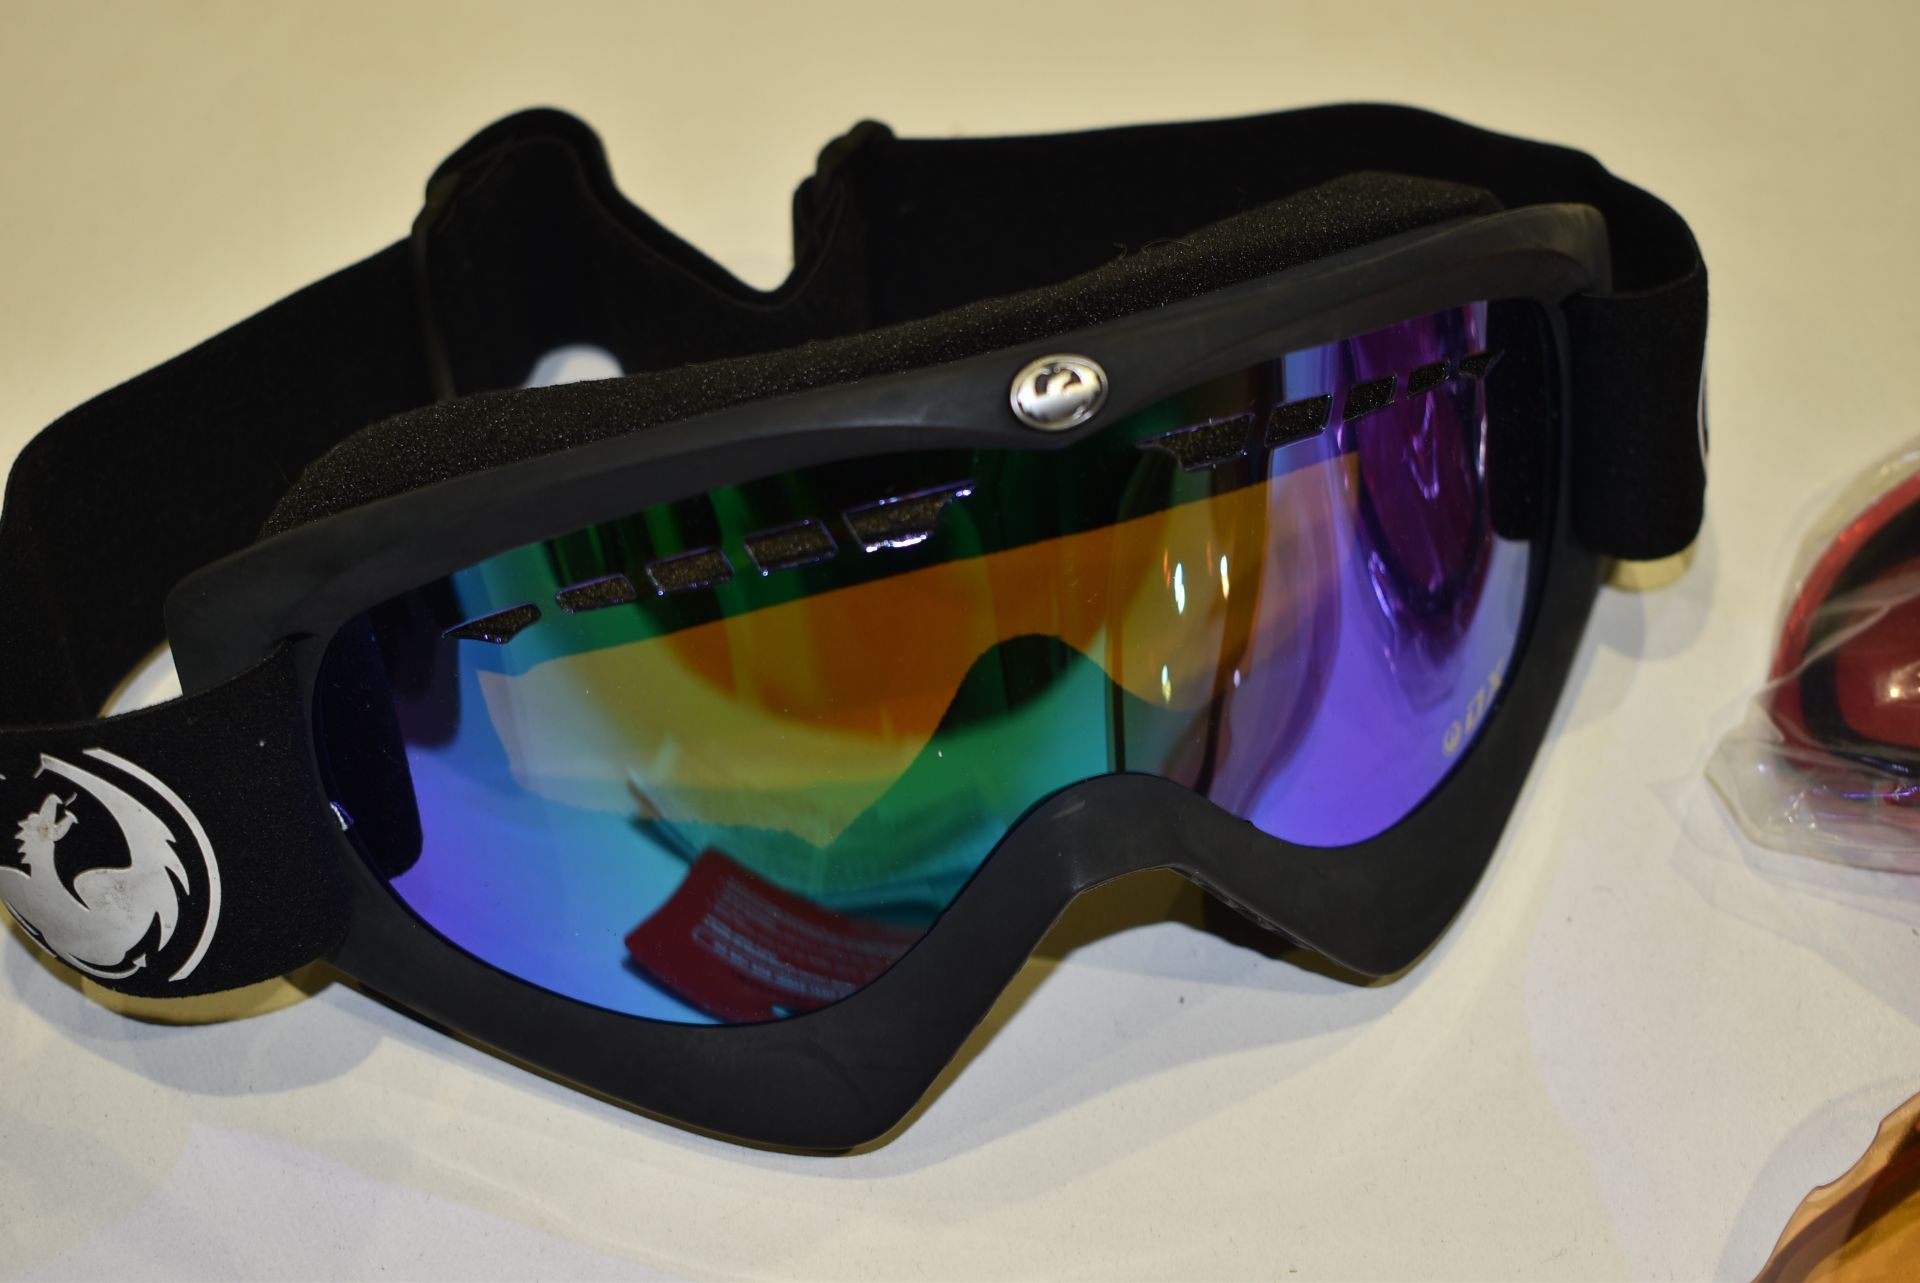 1 x Pair of Oakely Snow Goggles With Interchangeable Lenses and Carry Case - CL431 - Ref CB142 - - Image 5 of 8